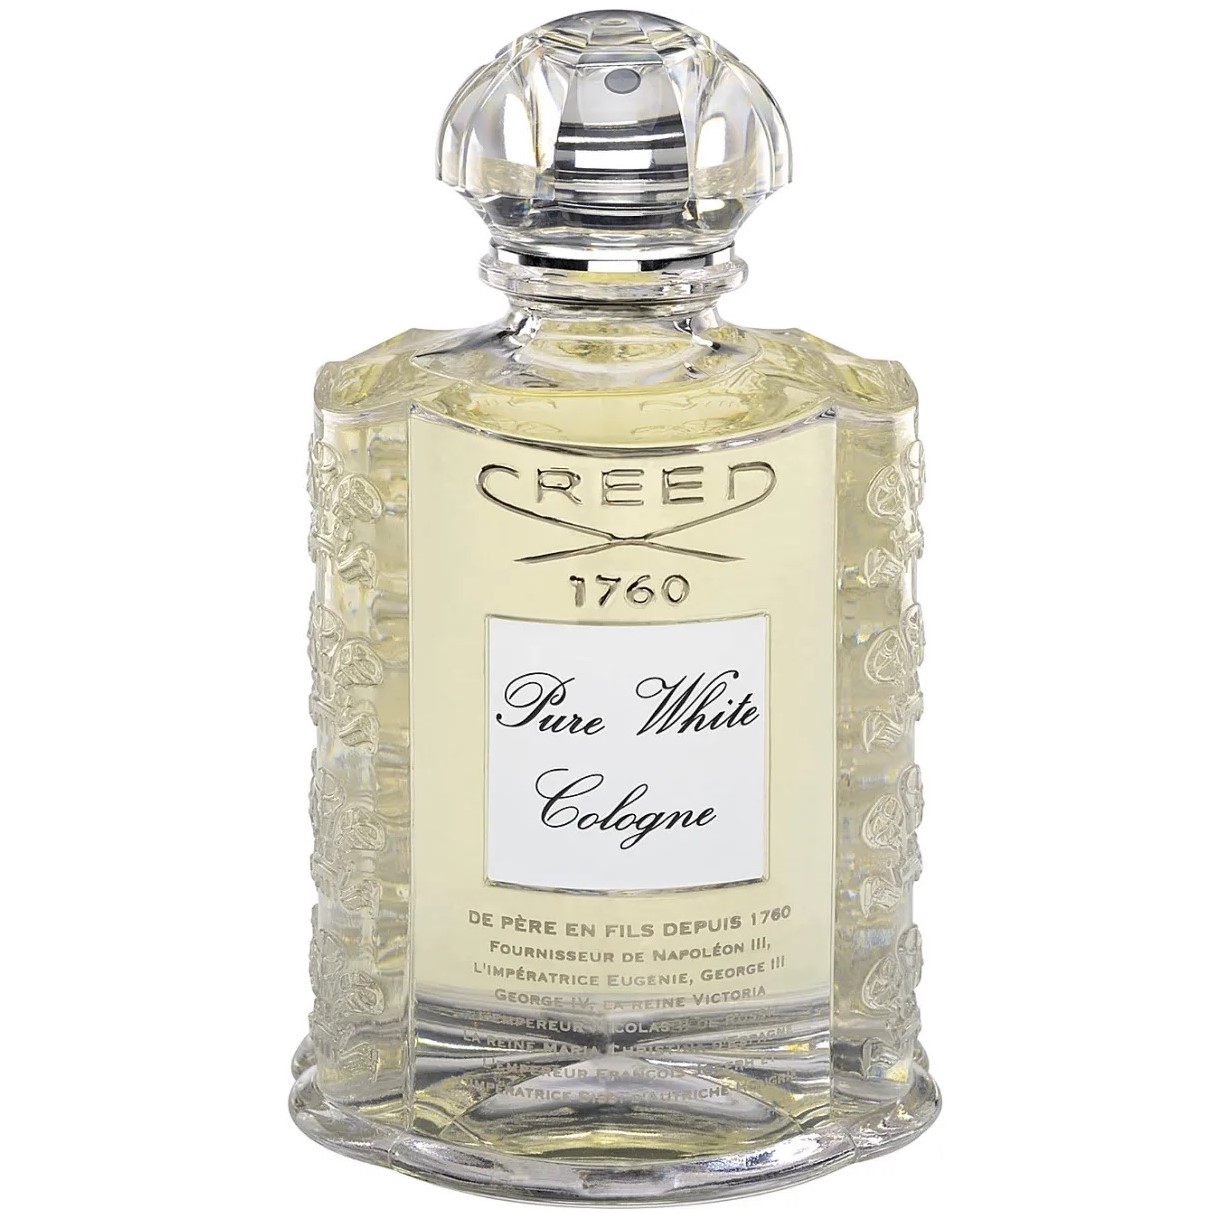 Creed - Pure White Cologne (2мл)